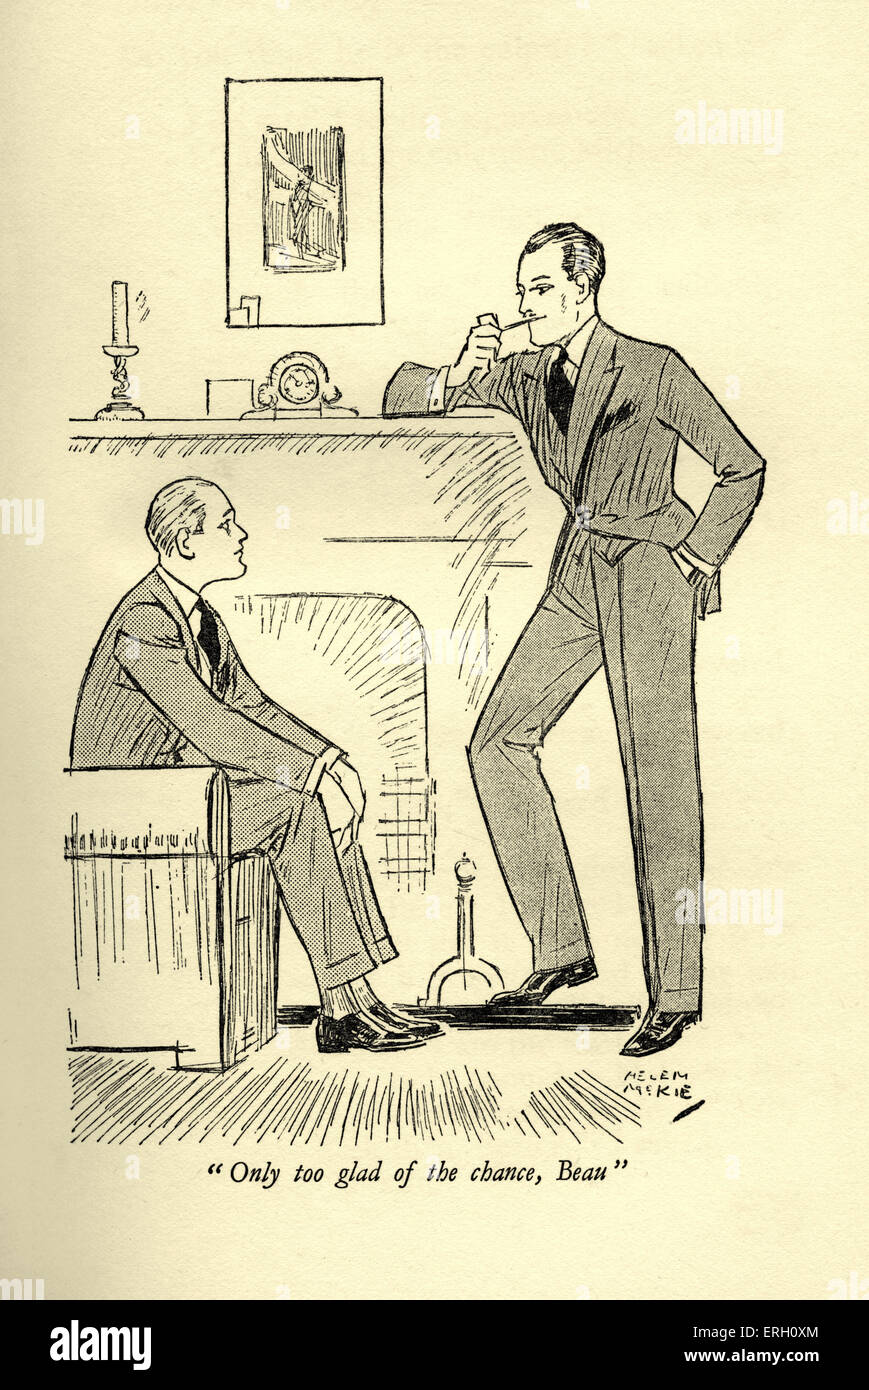 Beau Geste by P.C. Wren, first published in 1924. Caption: Only too glad of the chance, Beau. Illustration by Helen Mckie. Stock Photo